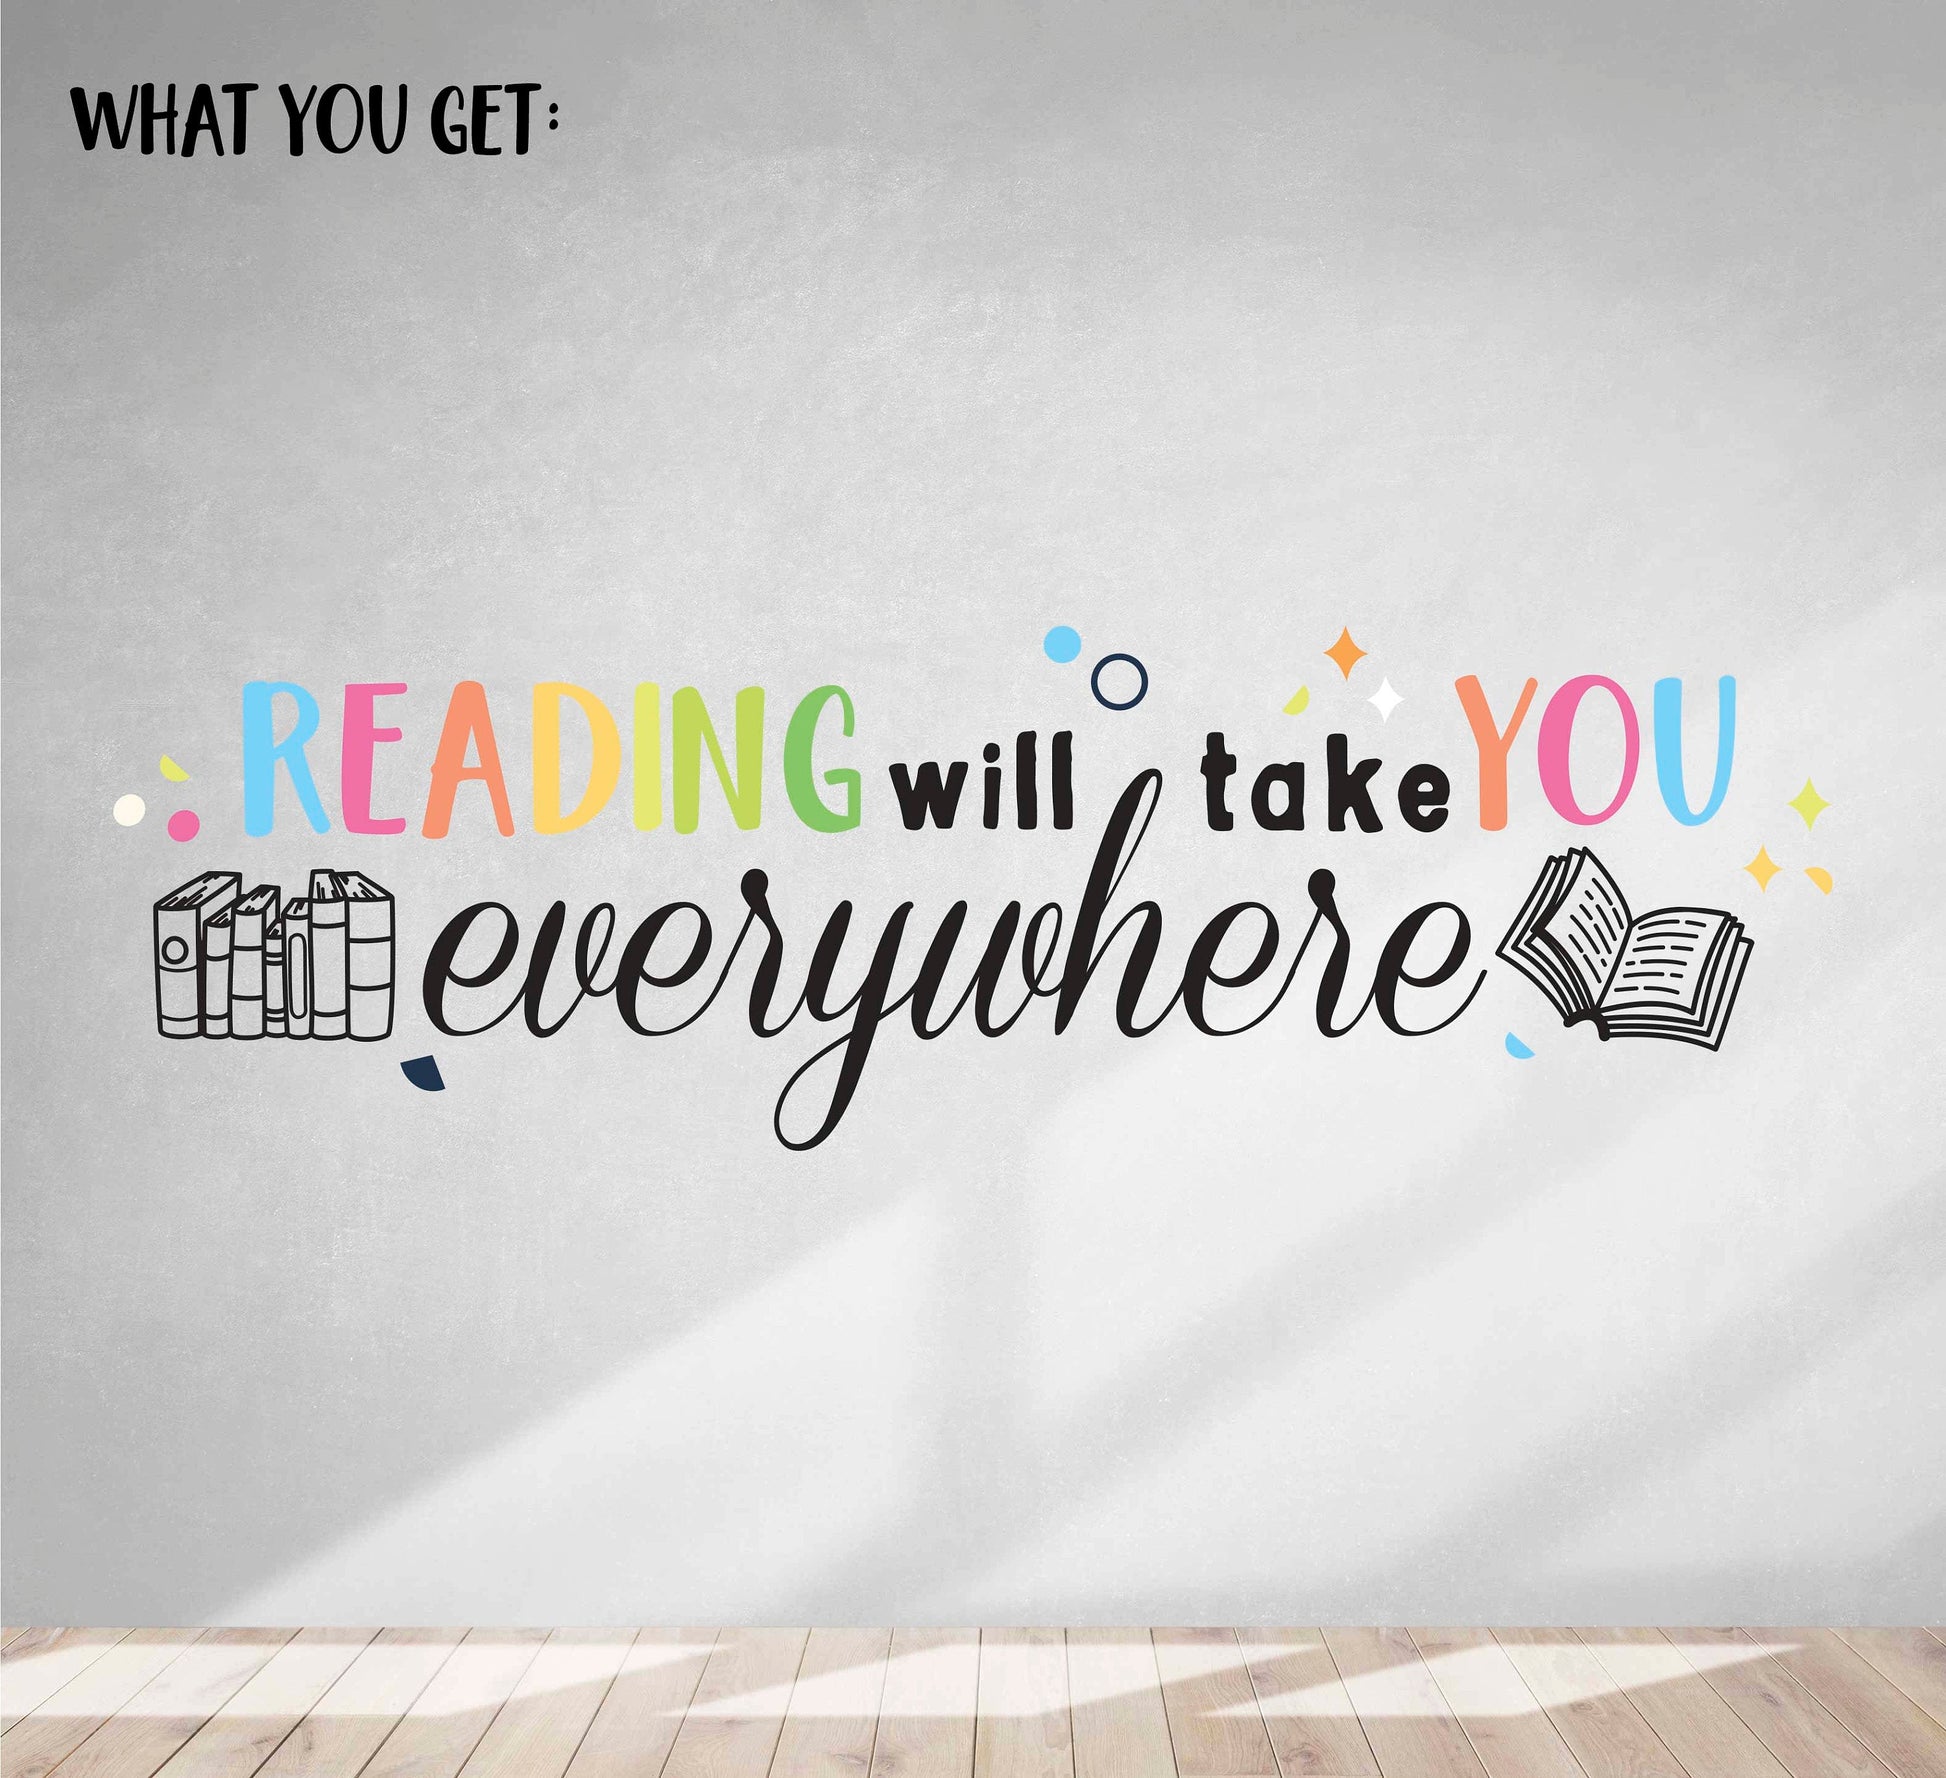 Reading will take you everywhere Wall Decal Playroom Stickers Classroom Decor Kids Books, LF356